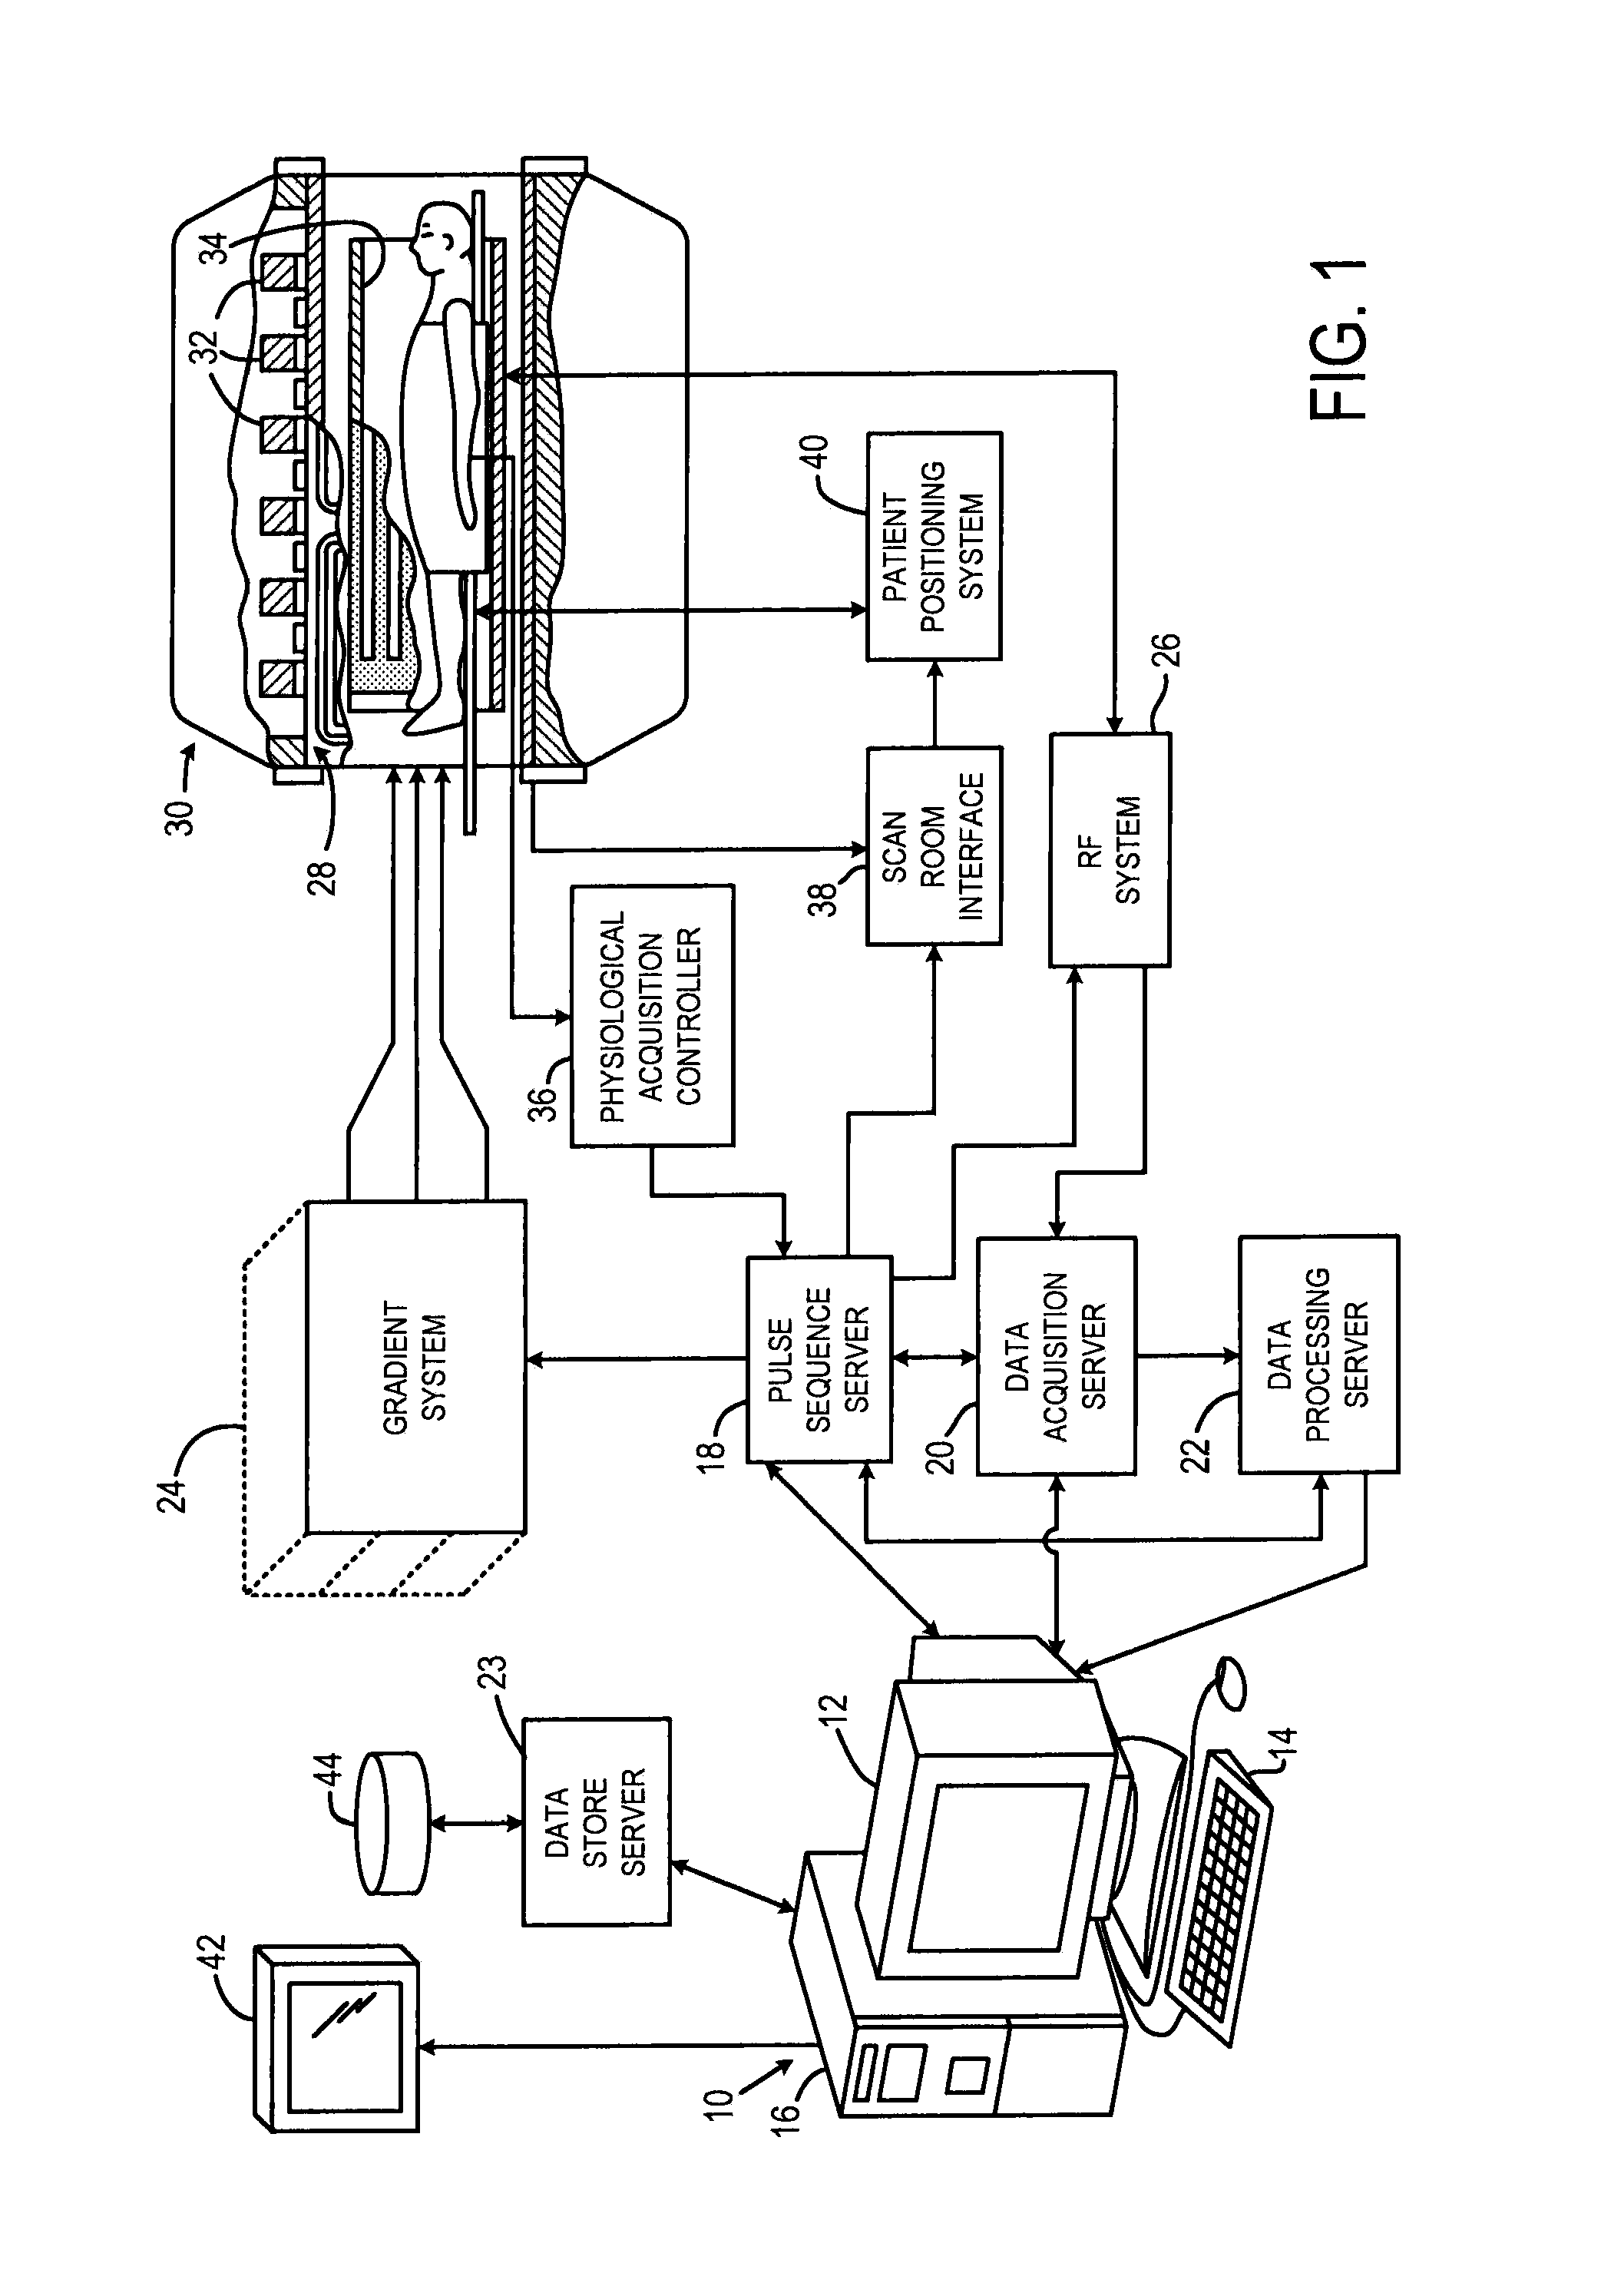 System and Method for Mode Mixing in Magnetic Resonance Imaging